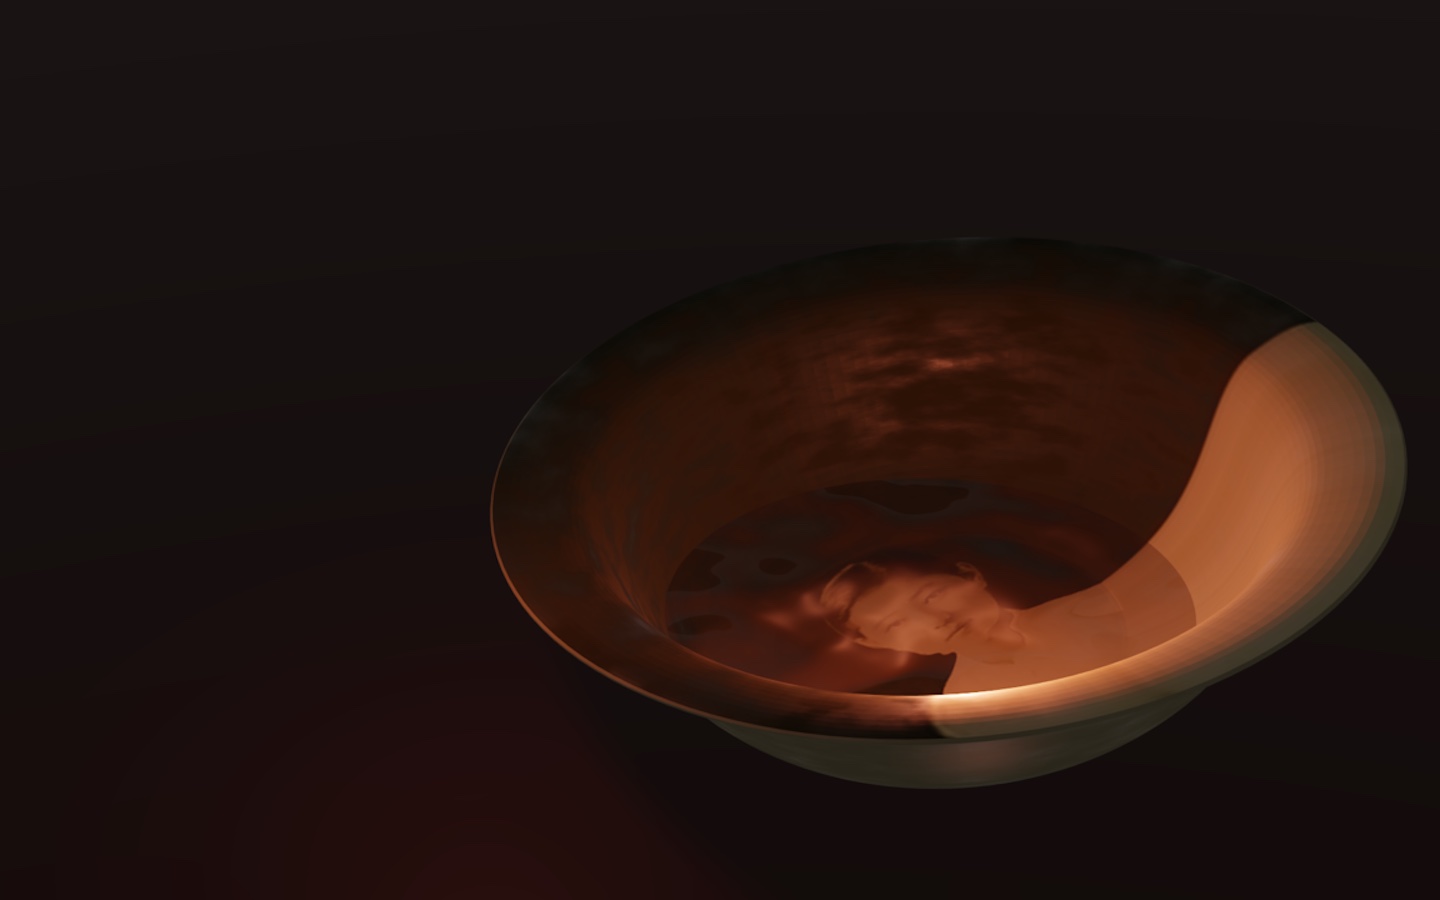 A woman's face reflected in a dark bowl